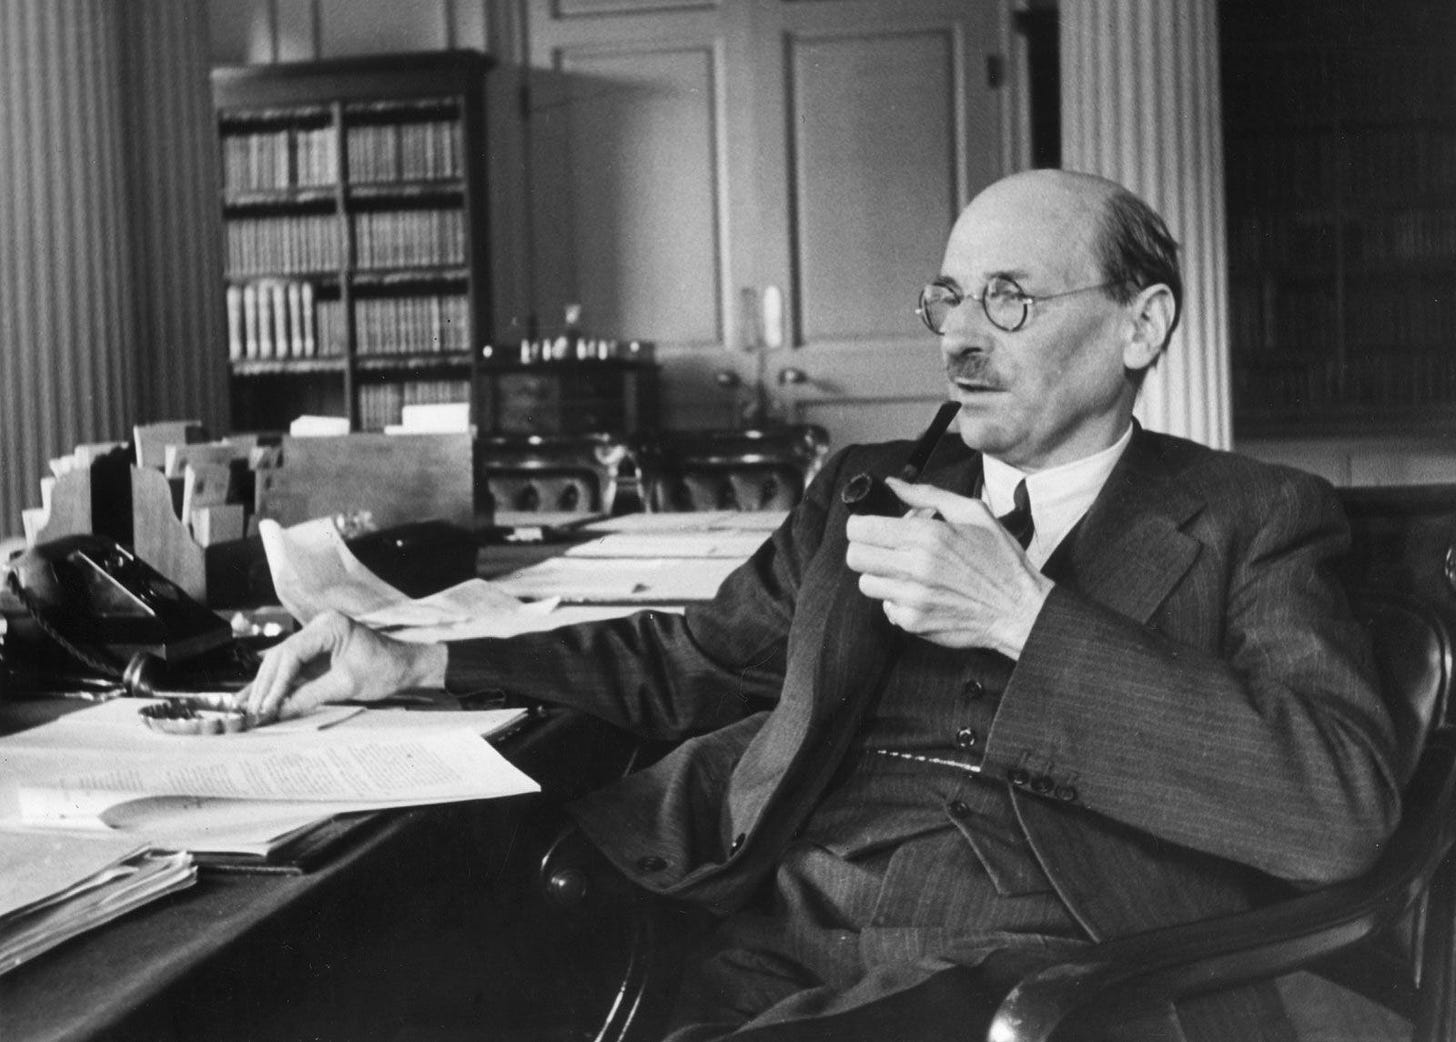 Clement Attlee | Biography, Accomplishments, & Welfare State | Britannica